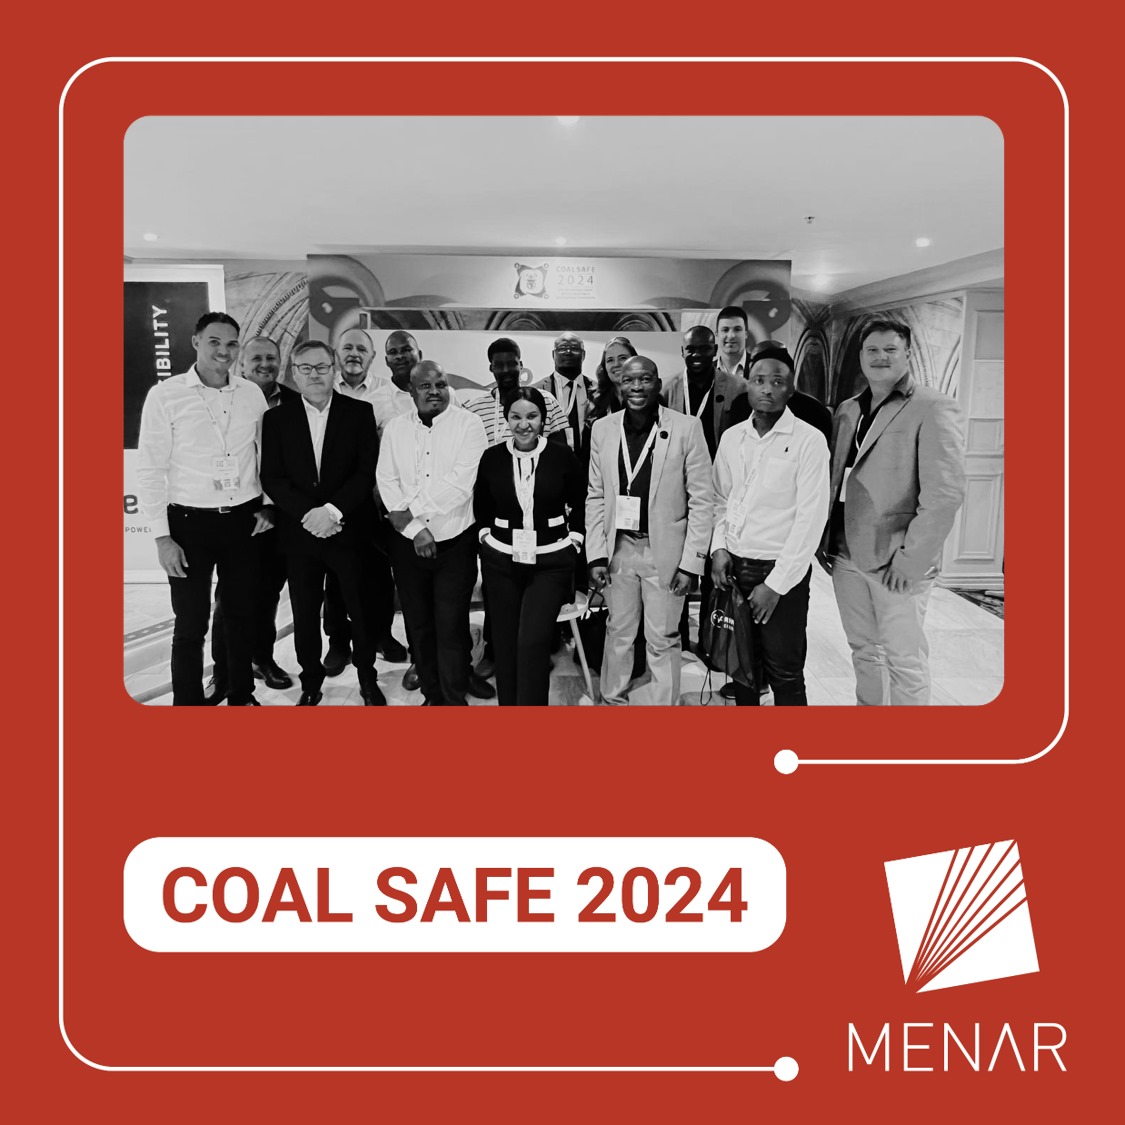 Team #menar and representatives of its subsidiaries #Kangra, #ZAC and #canyoncoal attended the 2024 annual COAL SAFE Conference at the Emperor’s Palace Convention Centre today. #CoalSafe is hosted by the South African Colliery Managers’ Association, with the aim of promoting